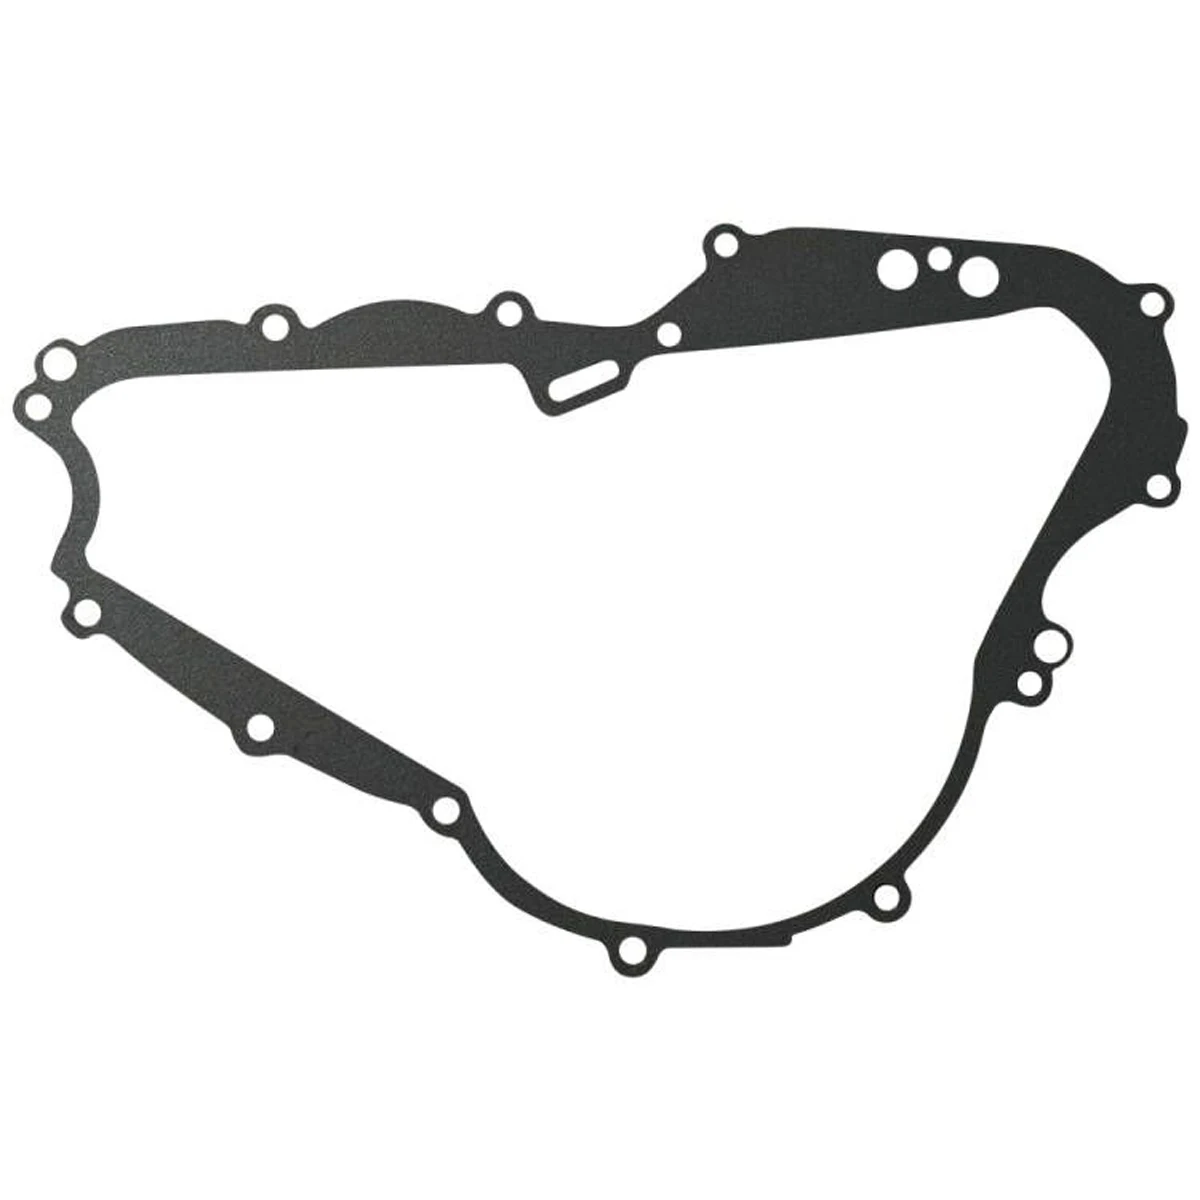 Motorcycle Engine Left Crankcase clutch cover Gasket for BMW F650 FUNDURO 93-99 F650GS 01-07 G650GS 09-14 G650X 07-08